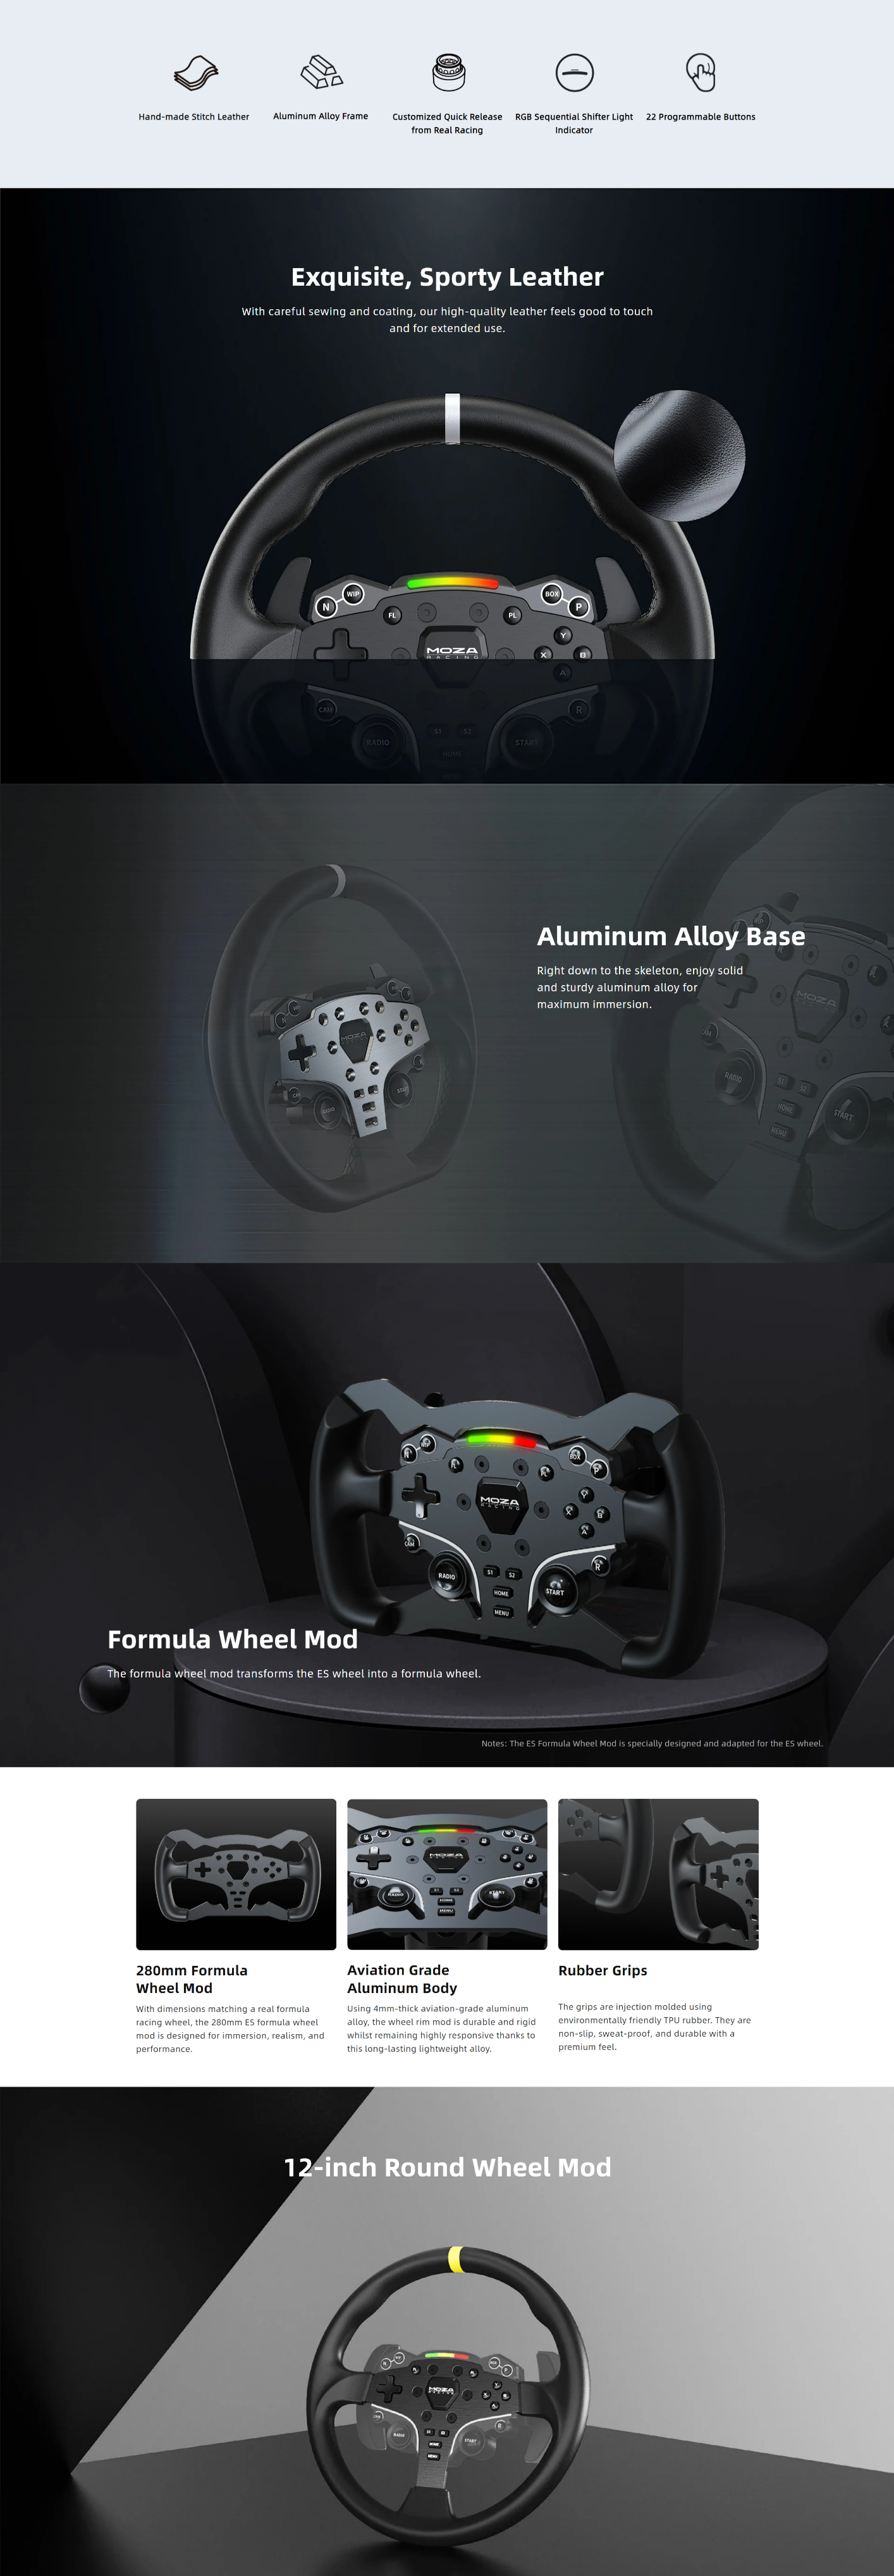 A large marketing image providing additional information about the product MOZA ES Steering Wheel - Additional alt info not provided